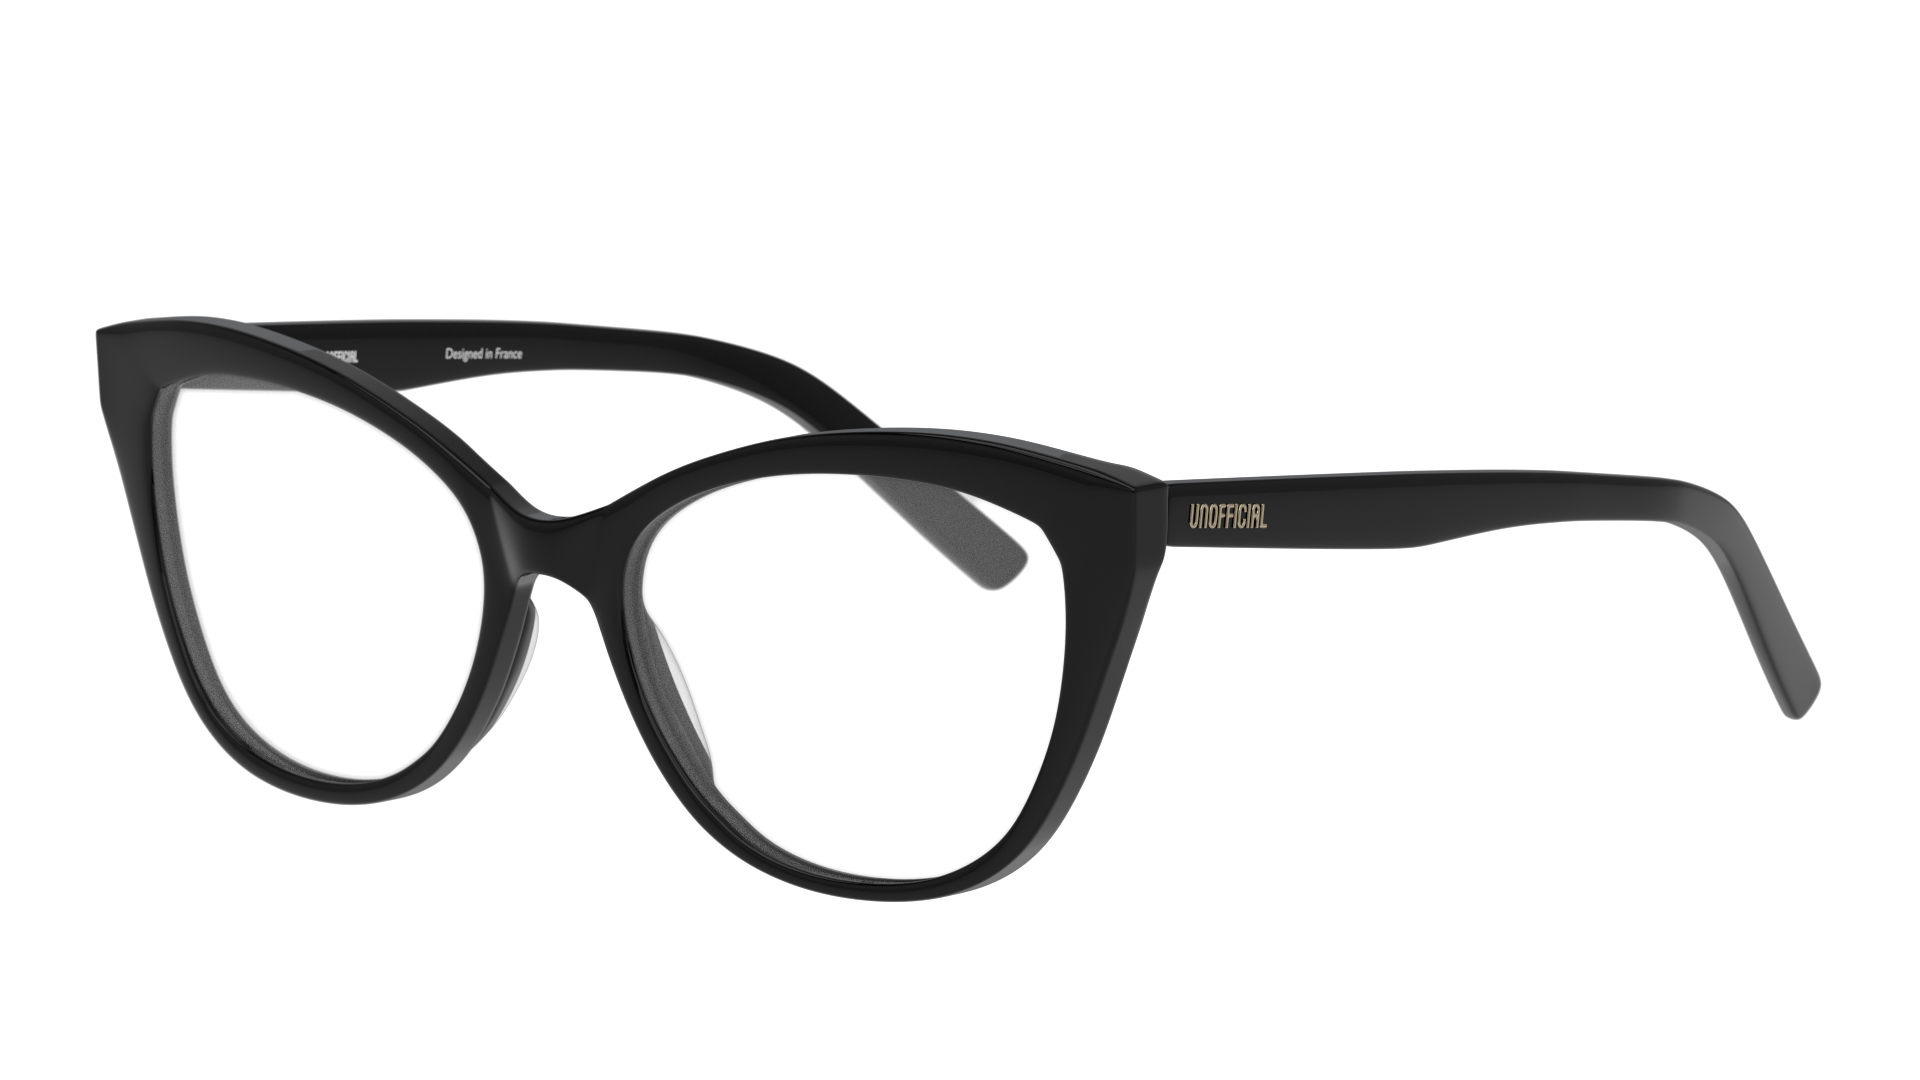 Angle_Left01 Unofficial UNOF0179 (BB00) Glasses Transparent / Black